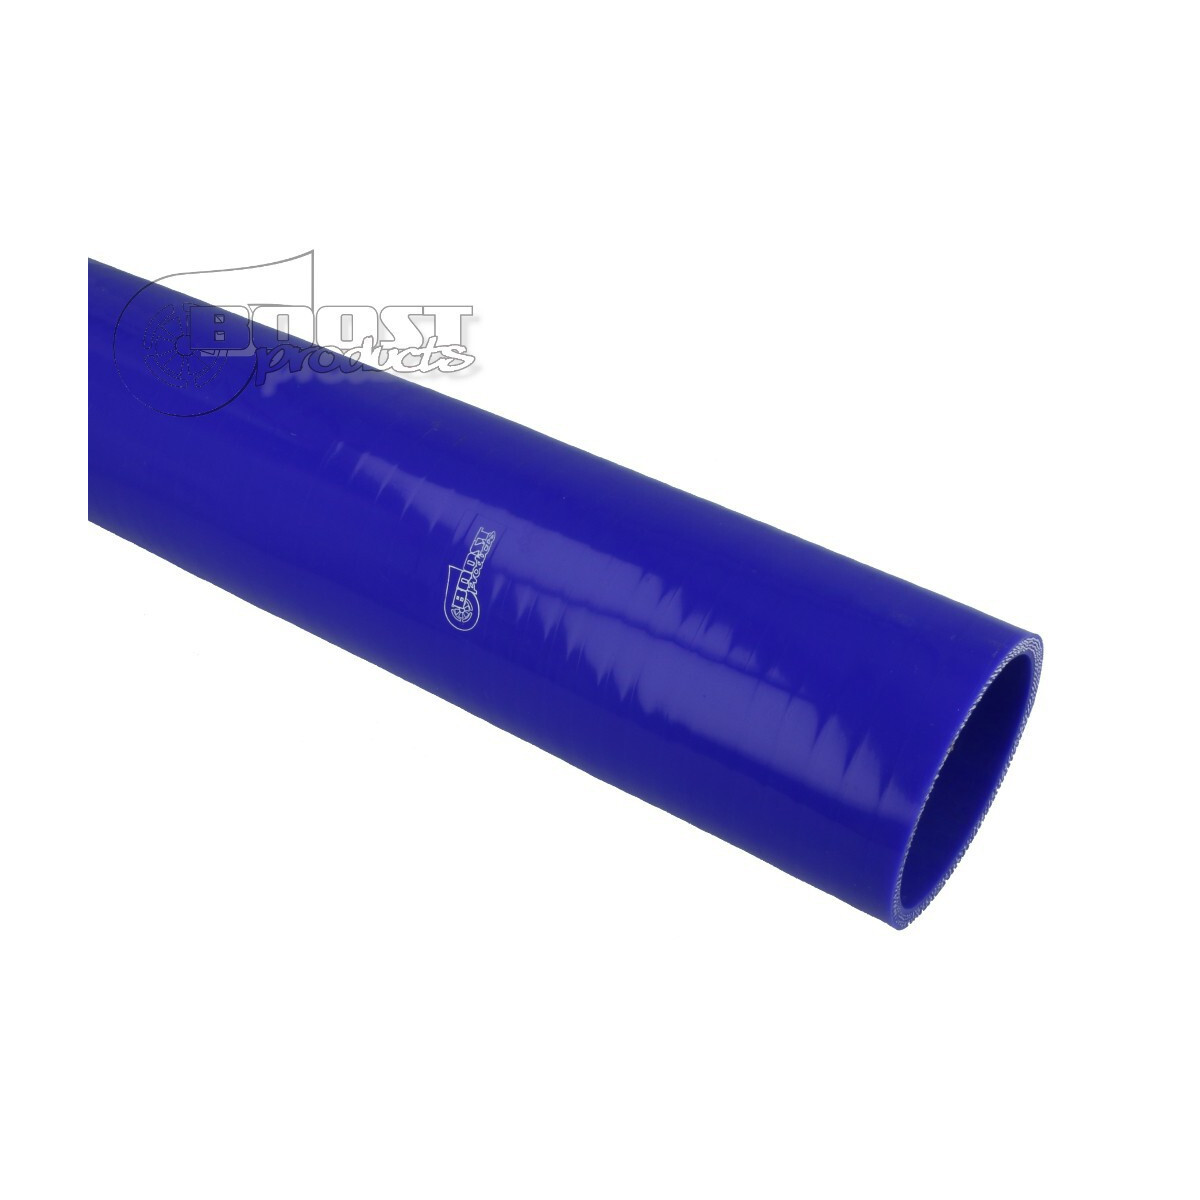 BOOST products Silicone Hose 70mm, 1m Length, blue